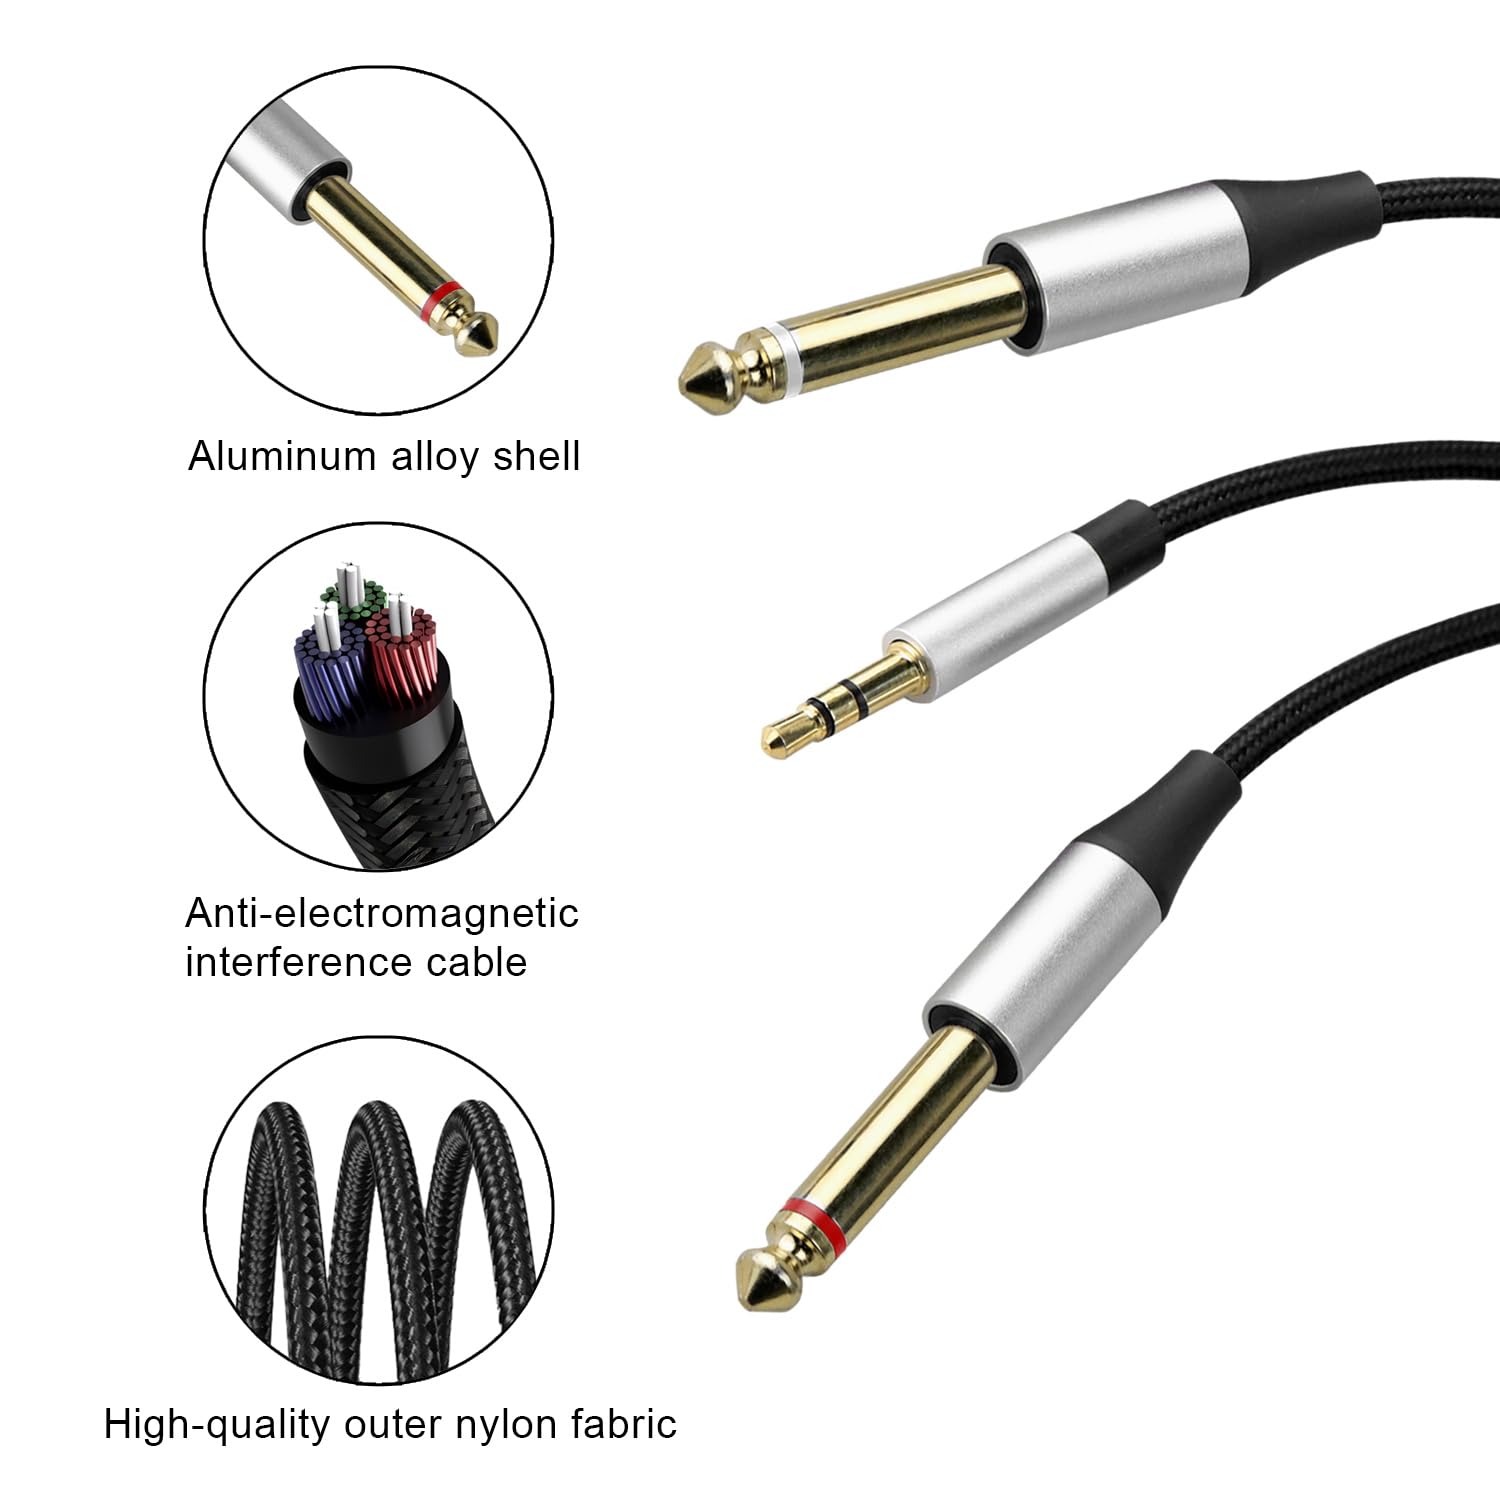 Meamaz MFi Certified Lightning Type C Aux 3.5mm to 1/4” 6.35mm and Aux 3.5mm Audio Stereo Cable with Hi-Fi DAC Chip Compatible for iOS& Android Power Amplifier Home Theater Speaker Car Audio Projector